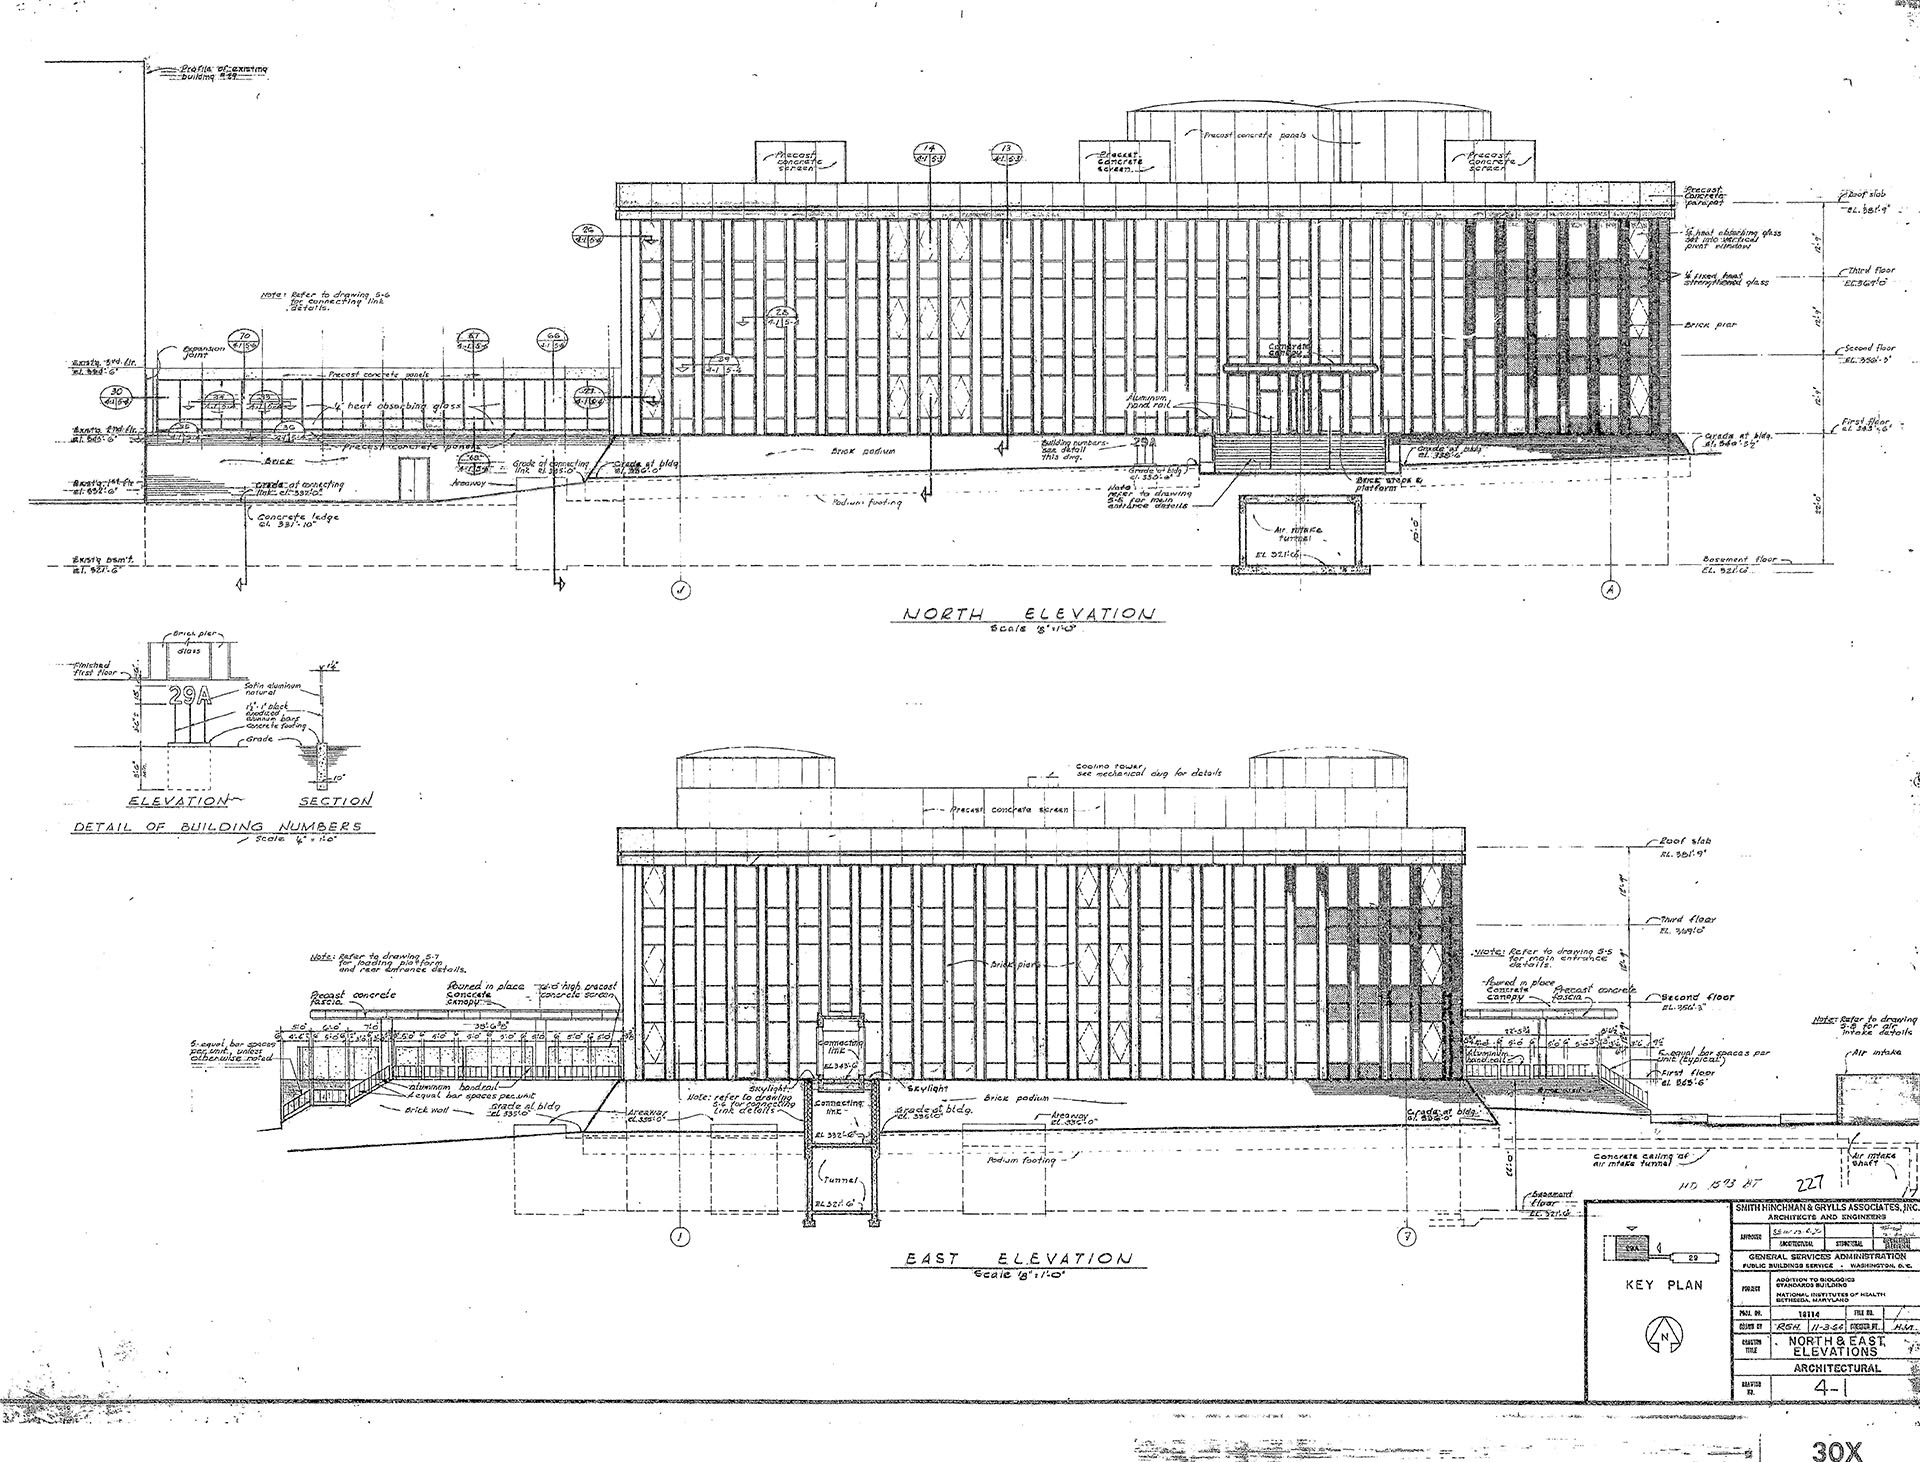 North and east elevation drawings of Building 29A.